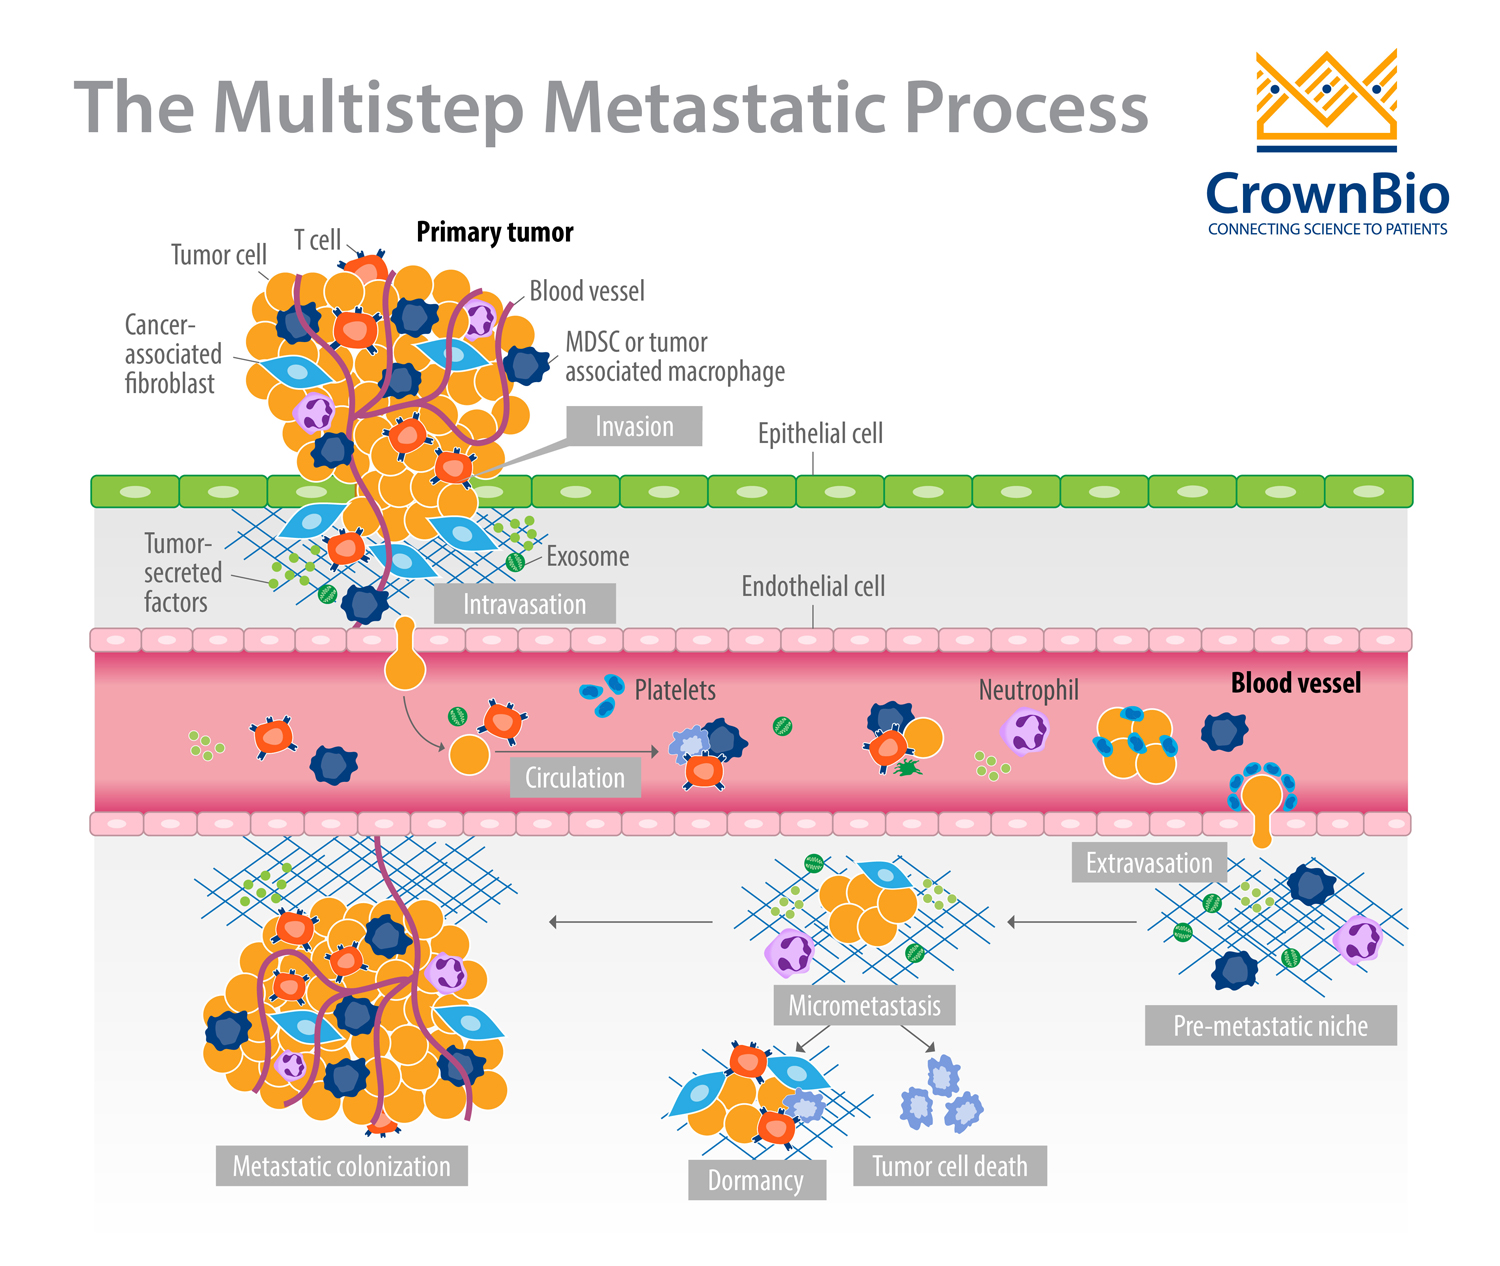 Recapitulating Clinical Metastatic Events in Preclinical Mouse Models